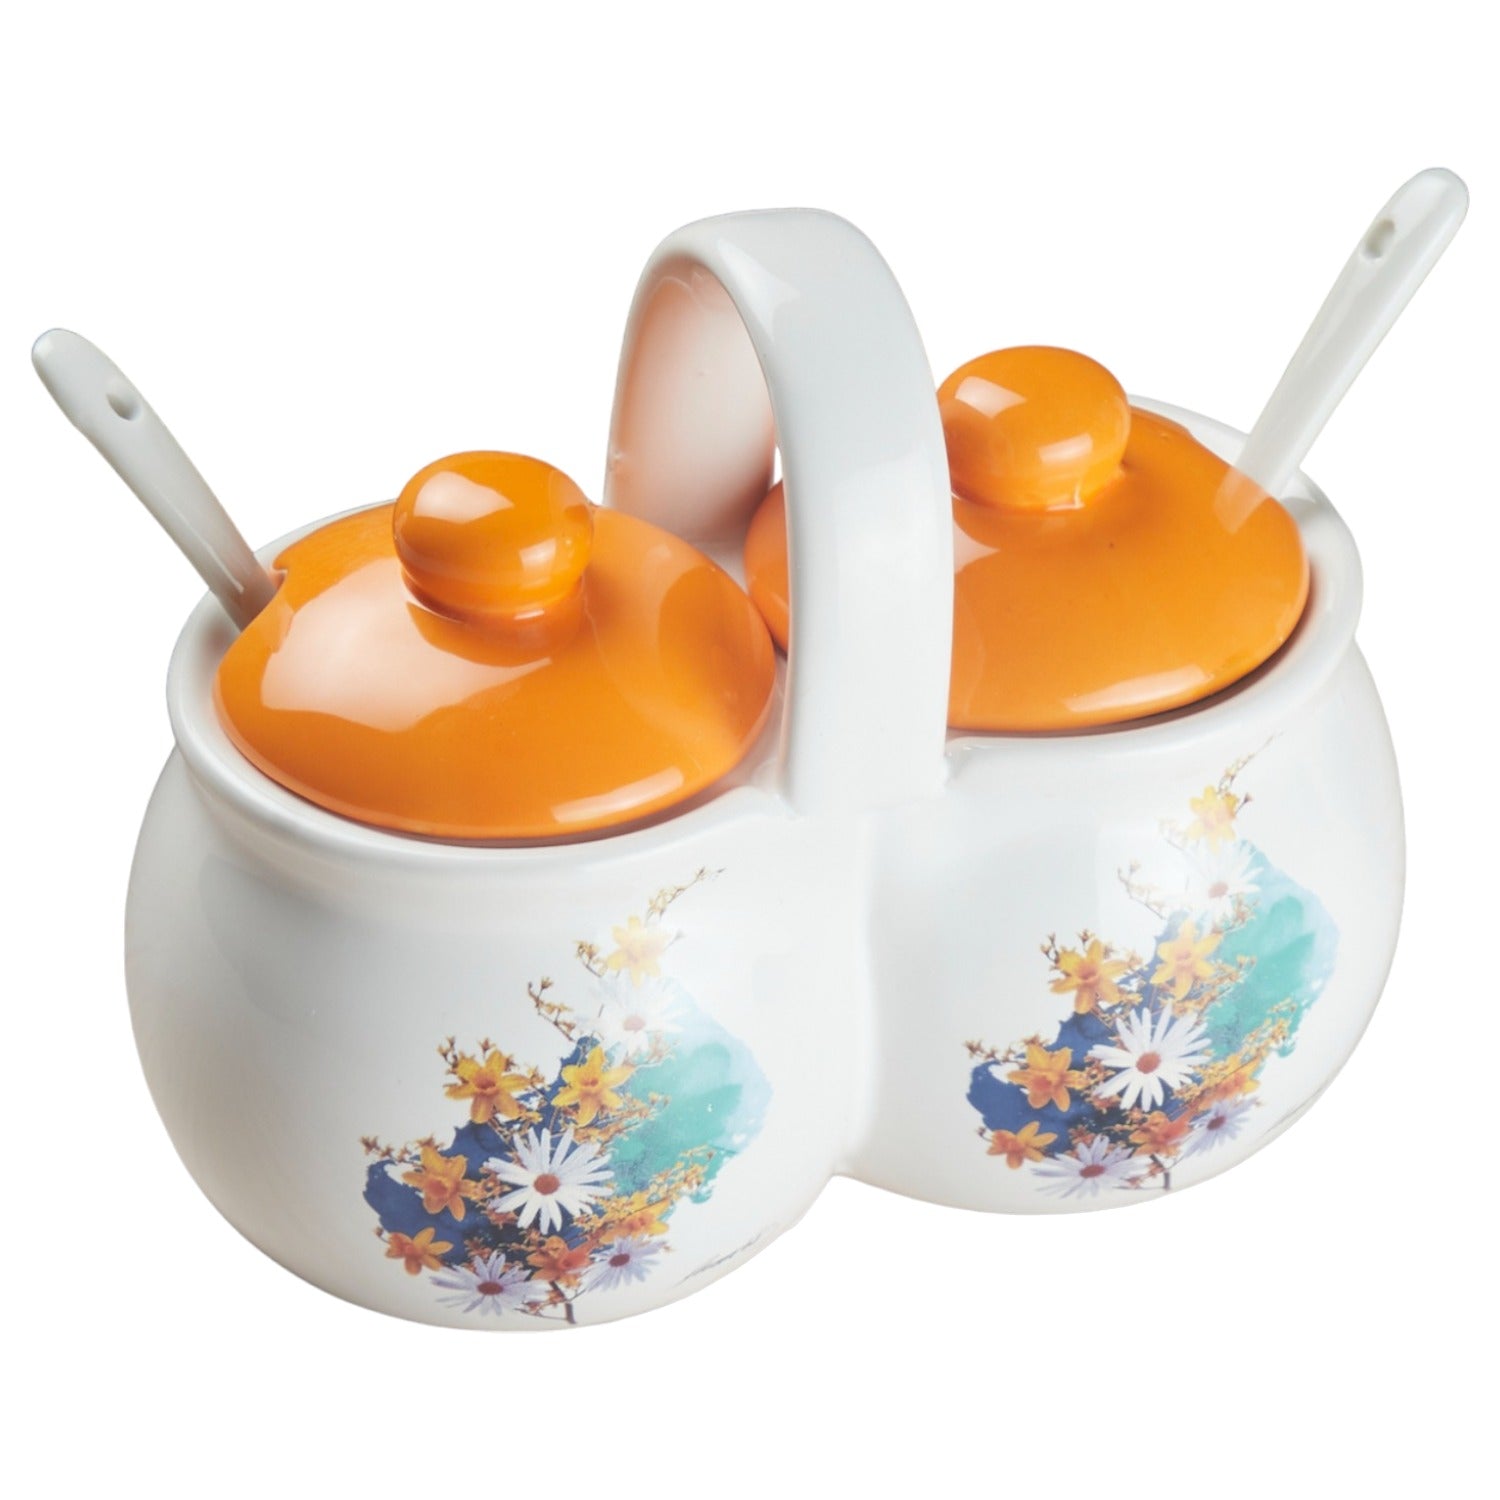 Ceramic Twin Condiment Jars with Lid & Spoon for Serving Pickle & Sauces (10271)